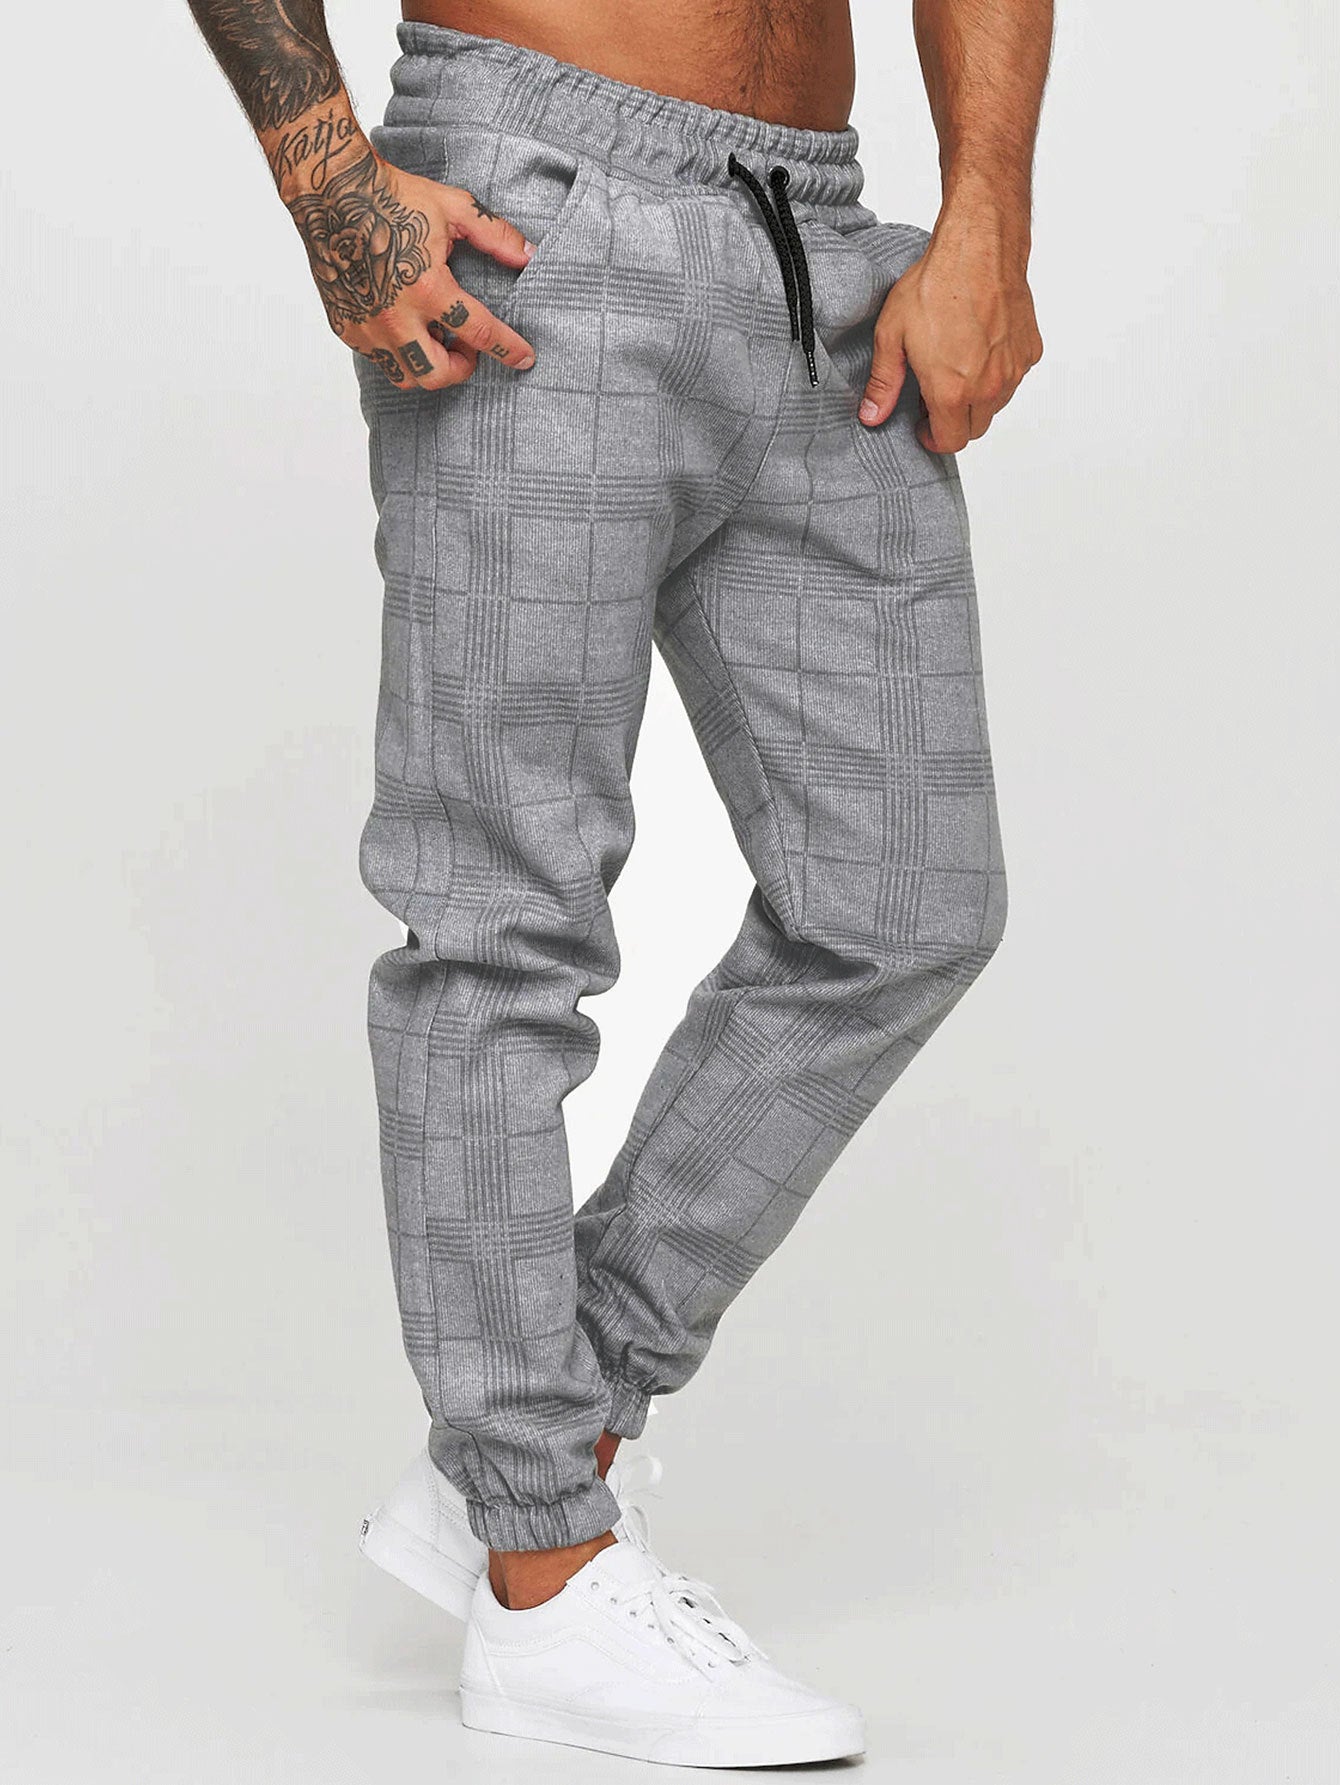 Printed Casual Trousers Fashion Casual Tappered